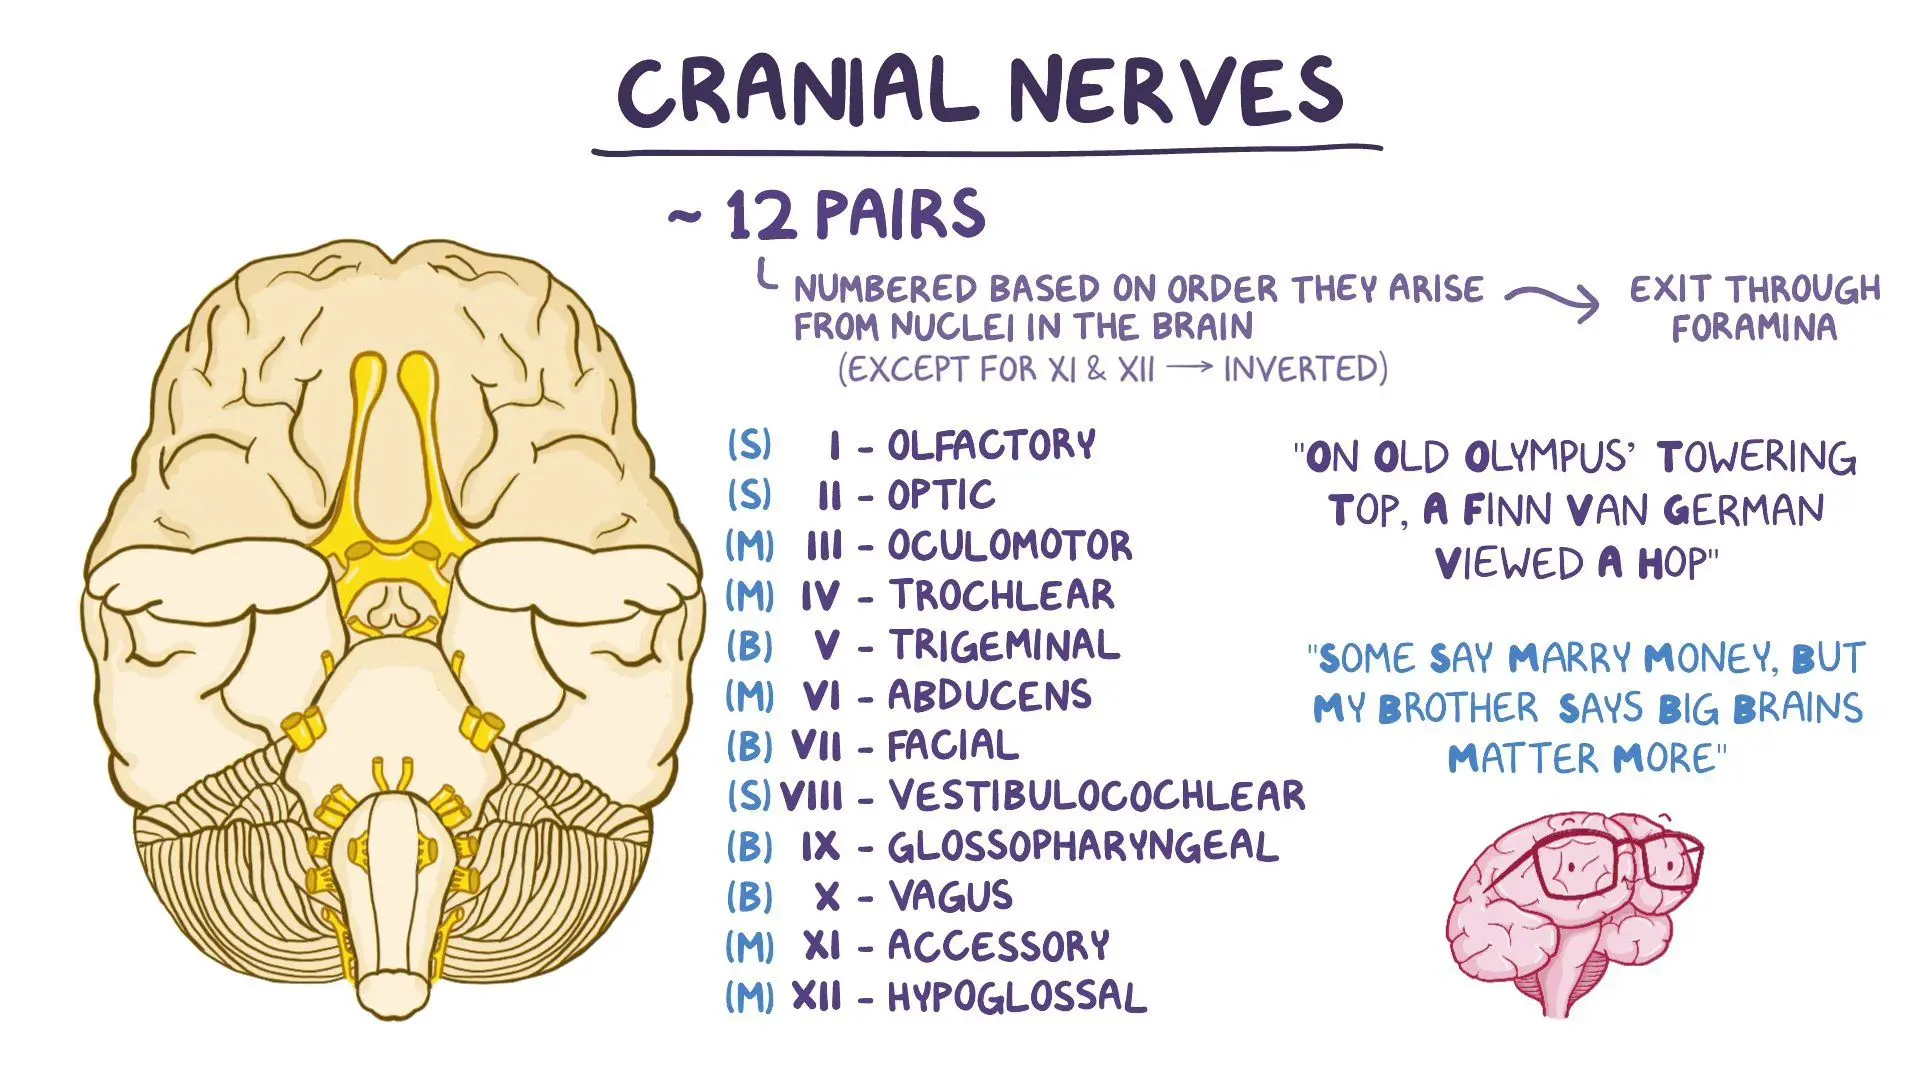 <p>Innervates the muscles of the head, face, and neck; connects the muscles and structures of the head, face, and neck to the CNS </p><ul><li><p>12 paired nerves </p></li><li><p>all either motor, sensory, or mixed motor-sensory </p></li></ul>